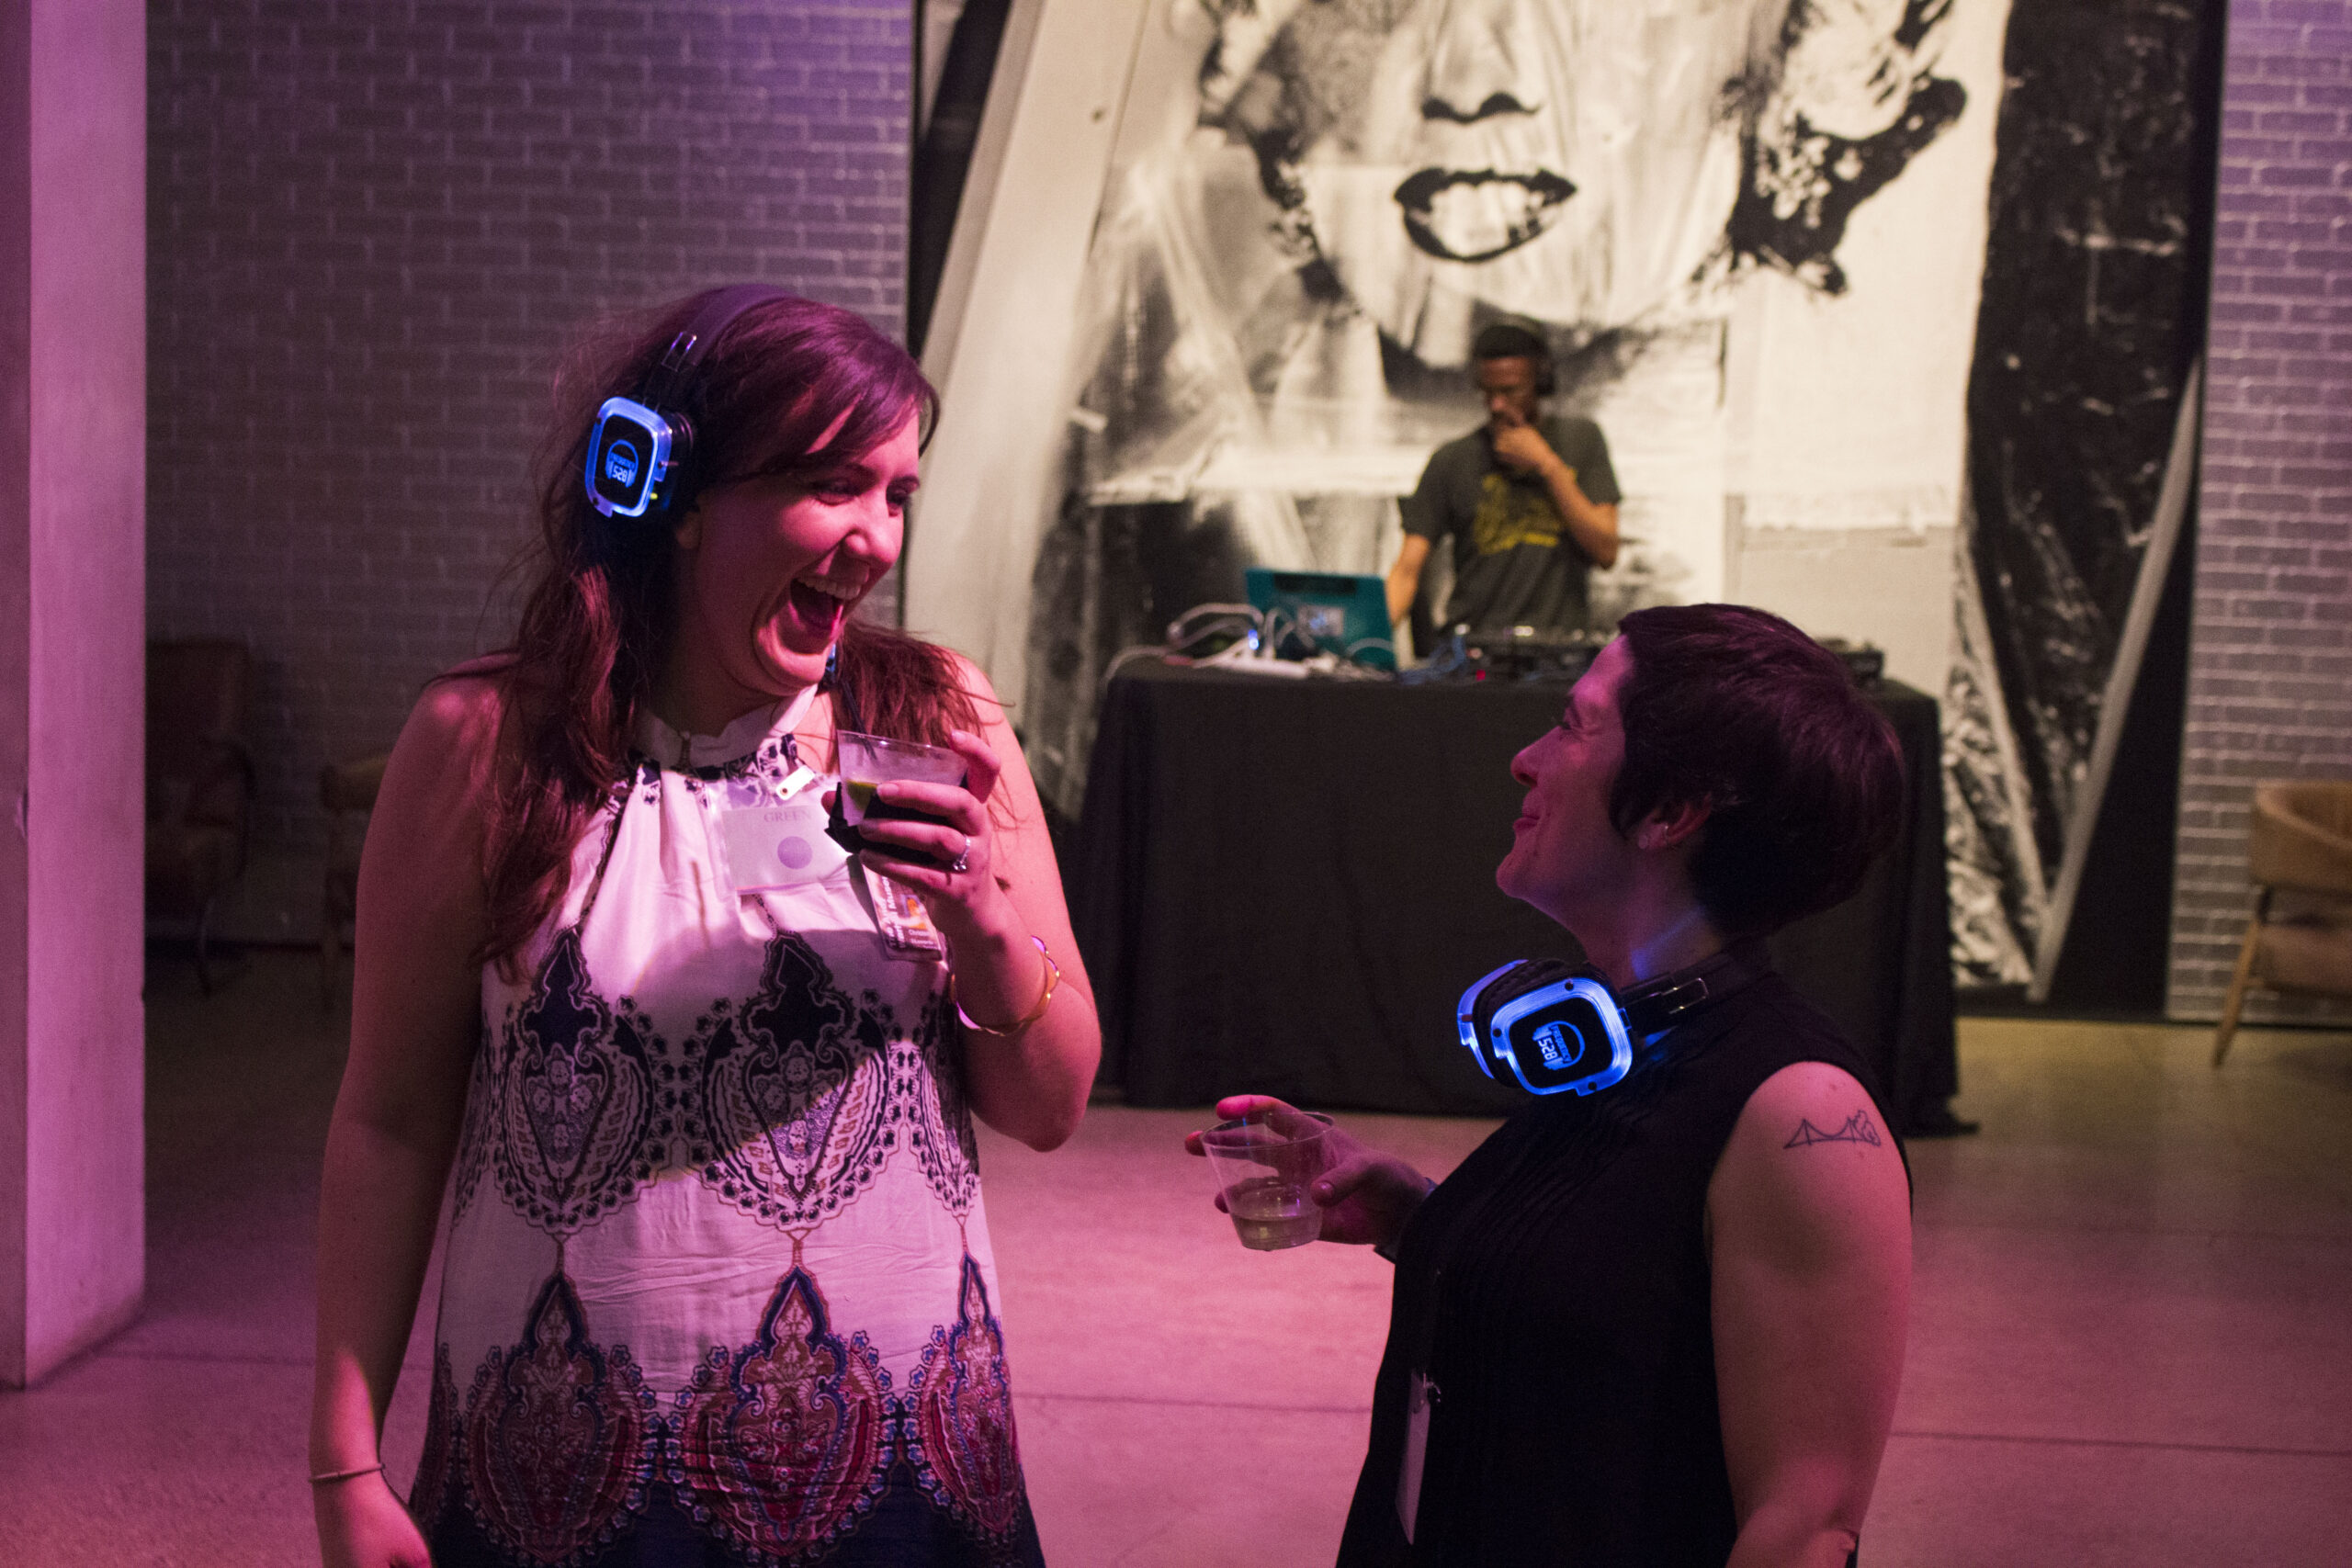 Two women wear noise-canceling headphones that light up bright blue. They are holding cocktails, looking at each other and laughing.